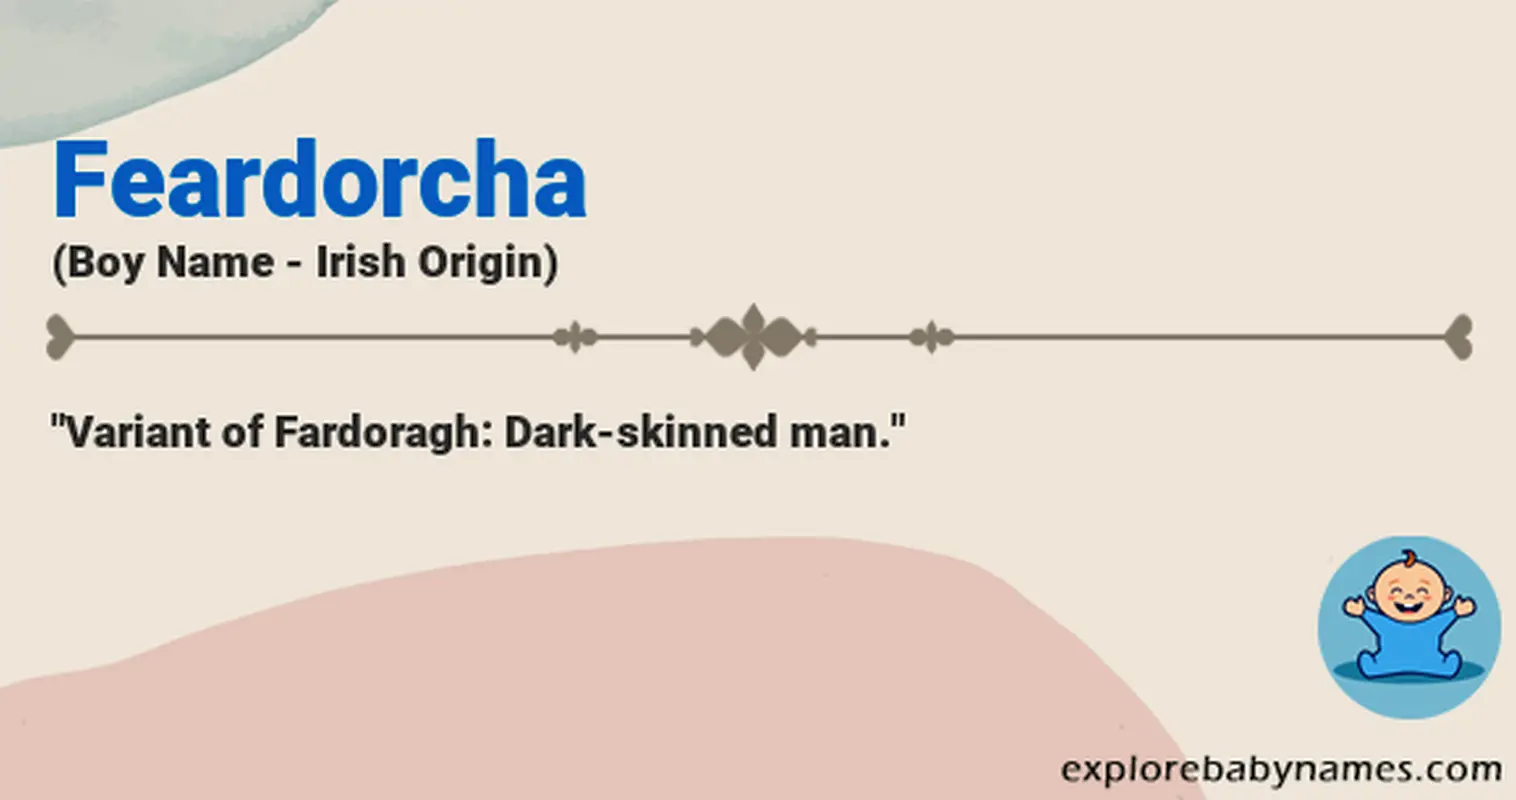 Meaning of Feardorcha